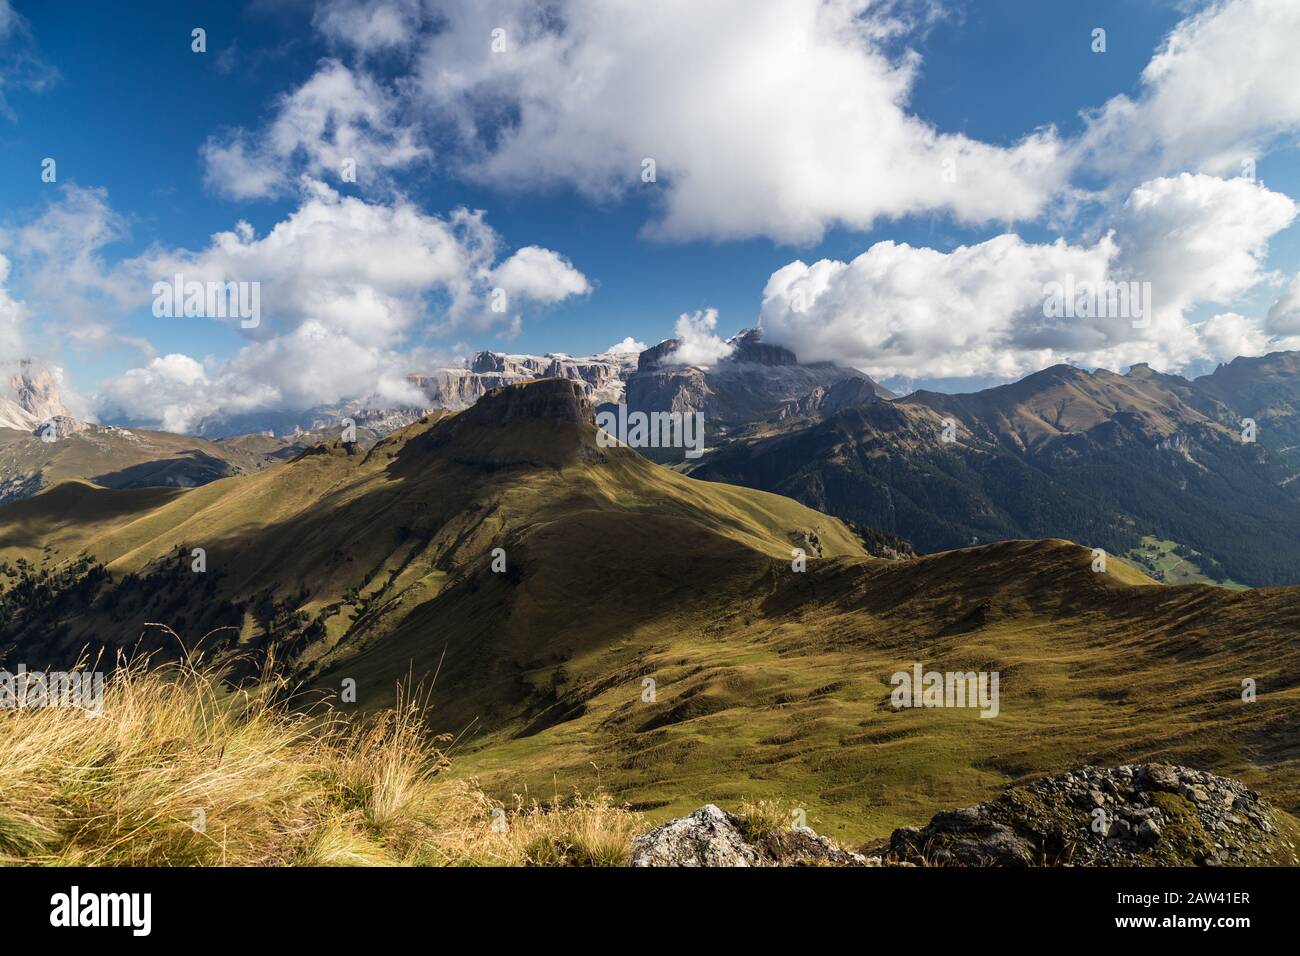 View of Sella massif in the Dolomites Stock Photo